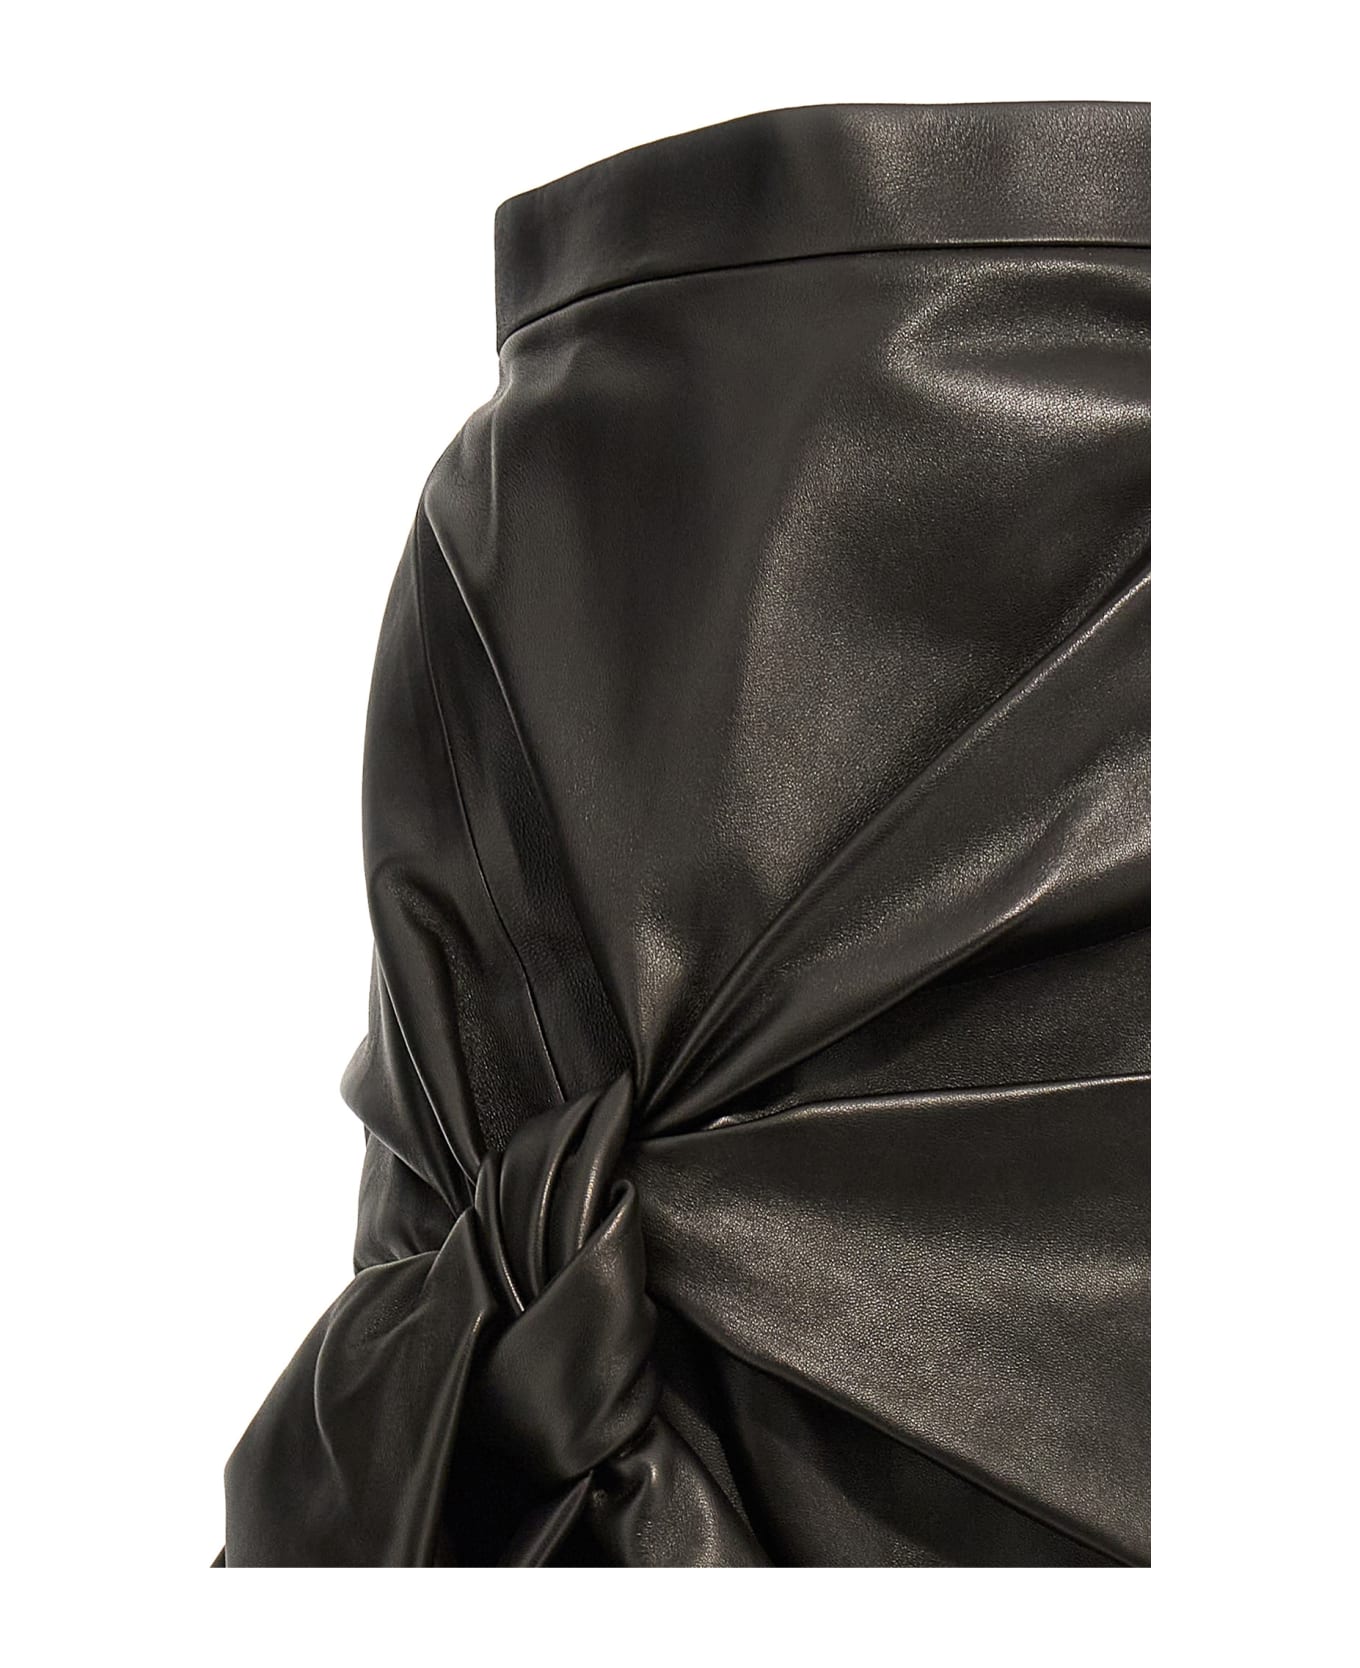 Alexander McQueen Leather Skirt With Maxi Bow - Black スカート